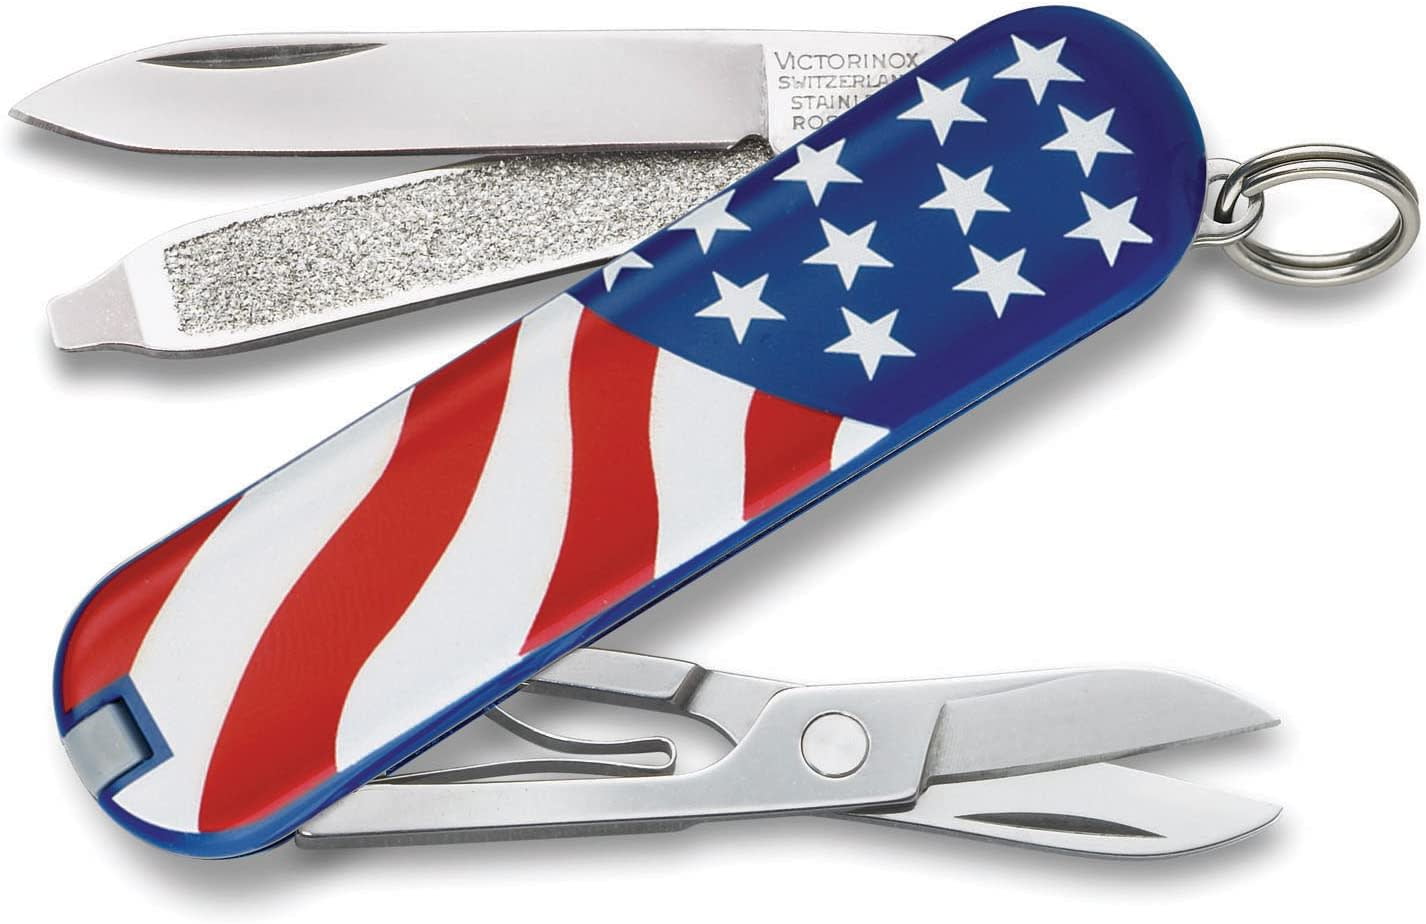 United States Army Stainless Steel-Blade Folding Pocket Knife